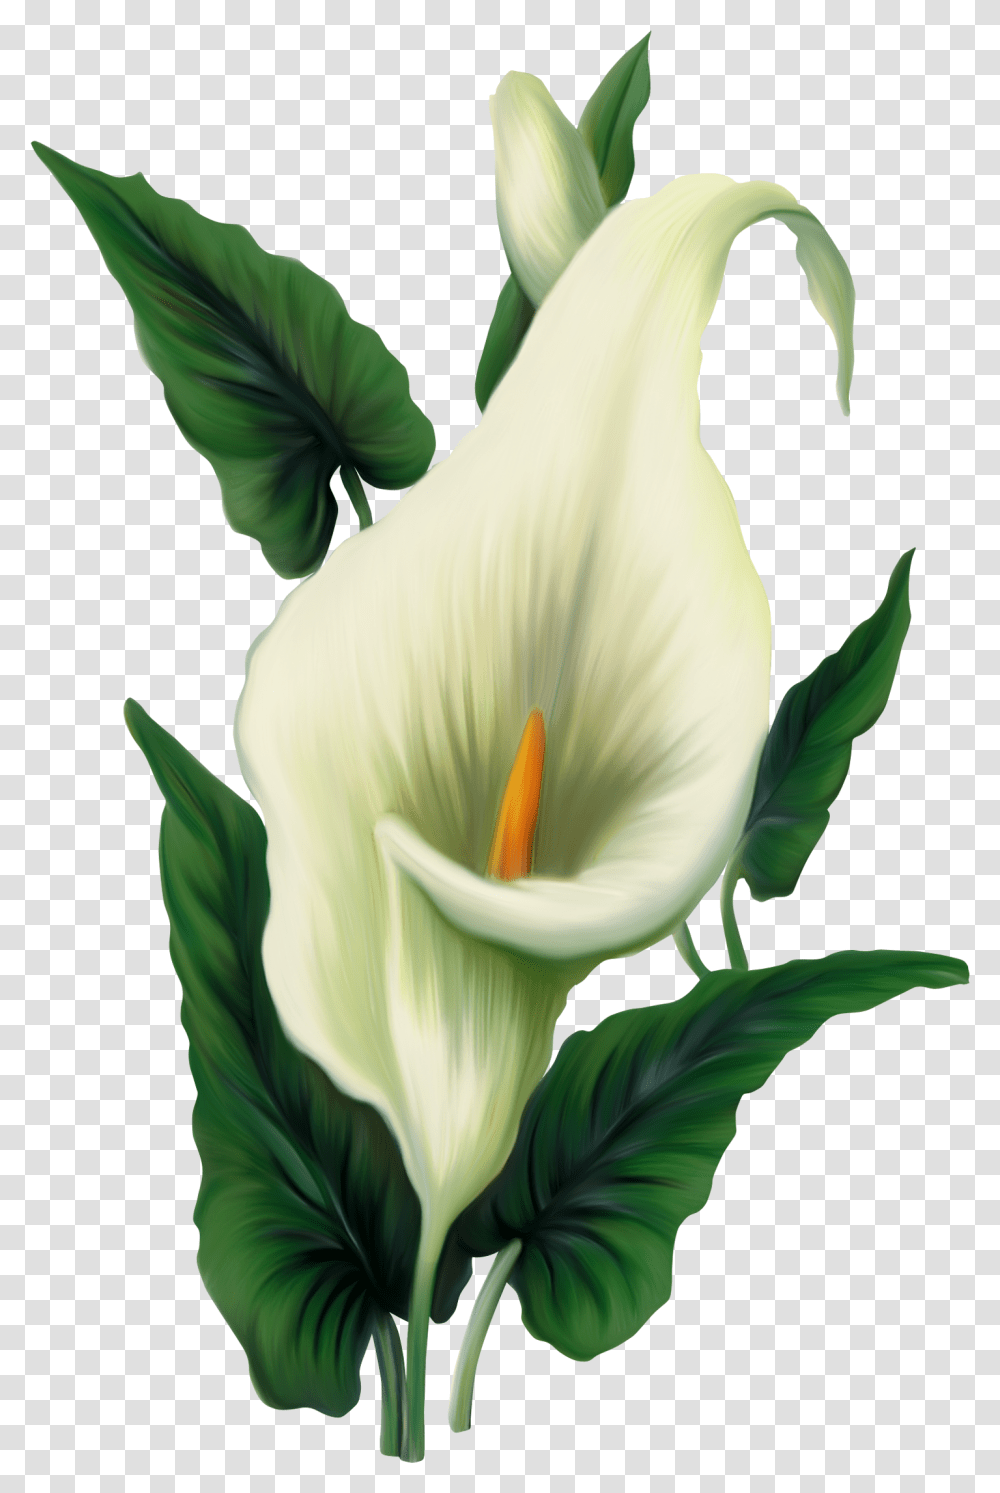 Lilies 46478 Free Icons And Backgrounds Flower Peace Lily, Plant, Blossom, Araceae, Bird Transparent Png